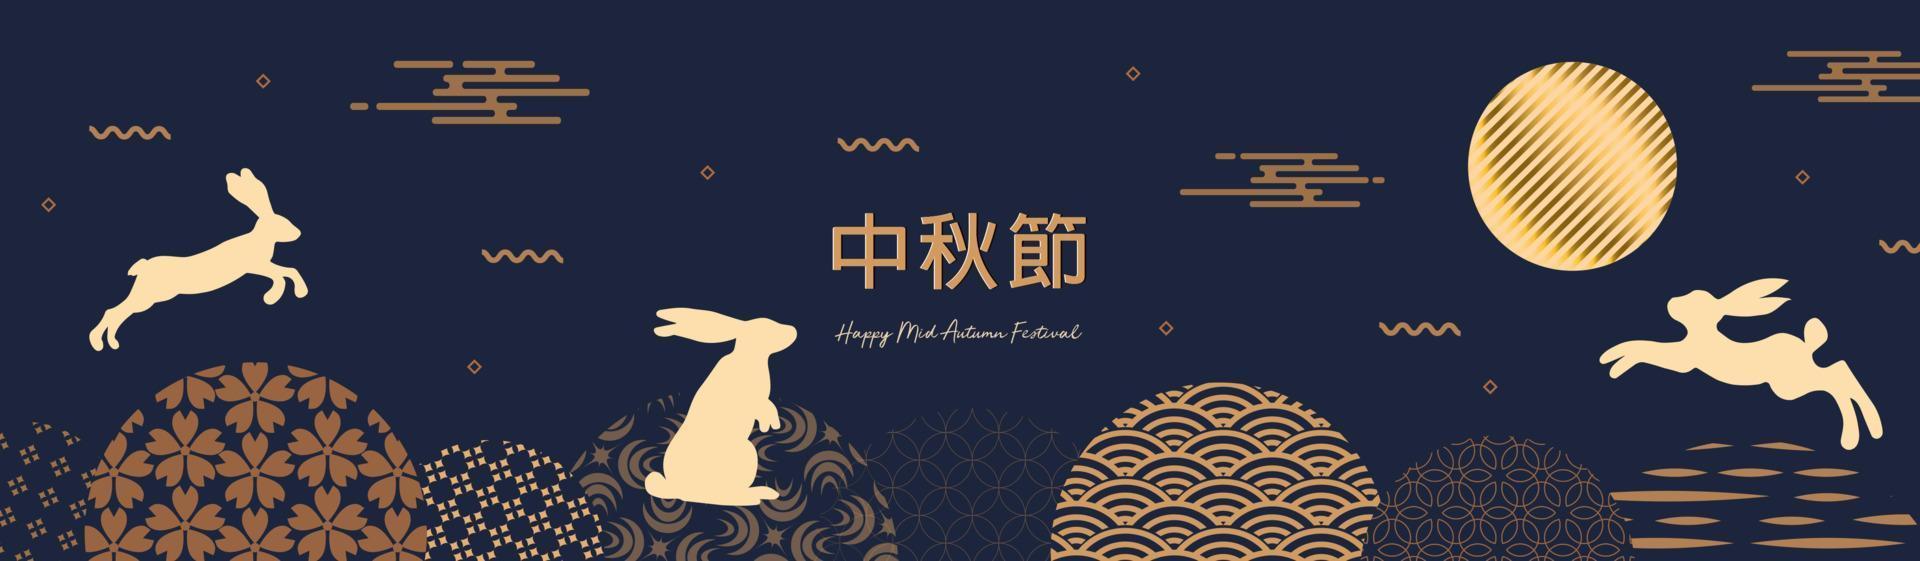 Banner design with traditional Chinese full moon circles, jumping hares under the moon. Translation from Chinese - Mid-Autumn Festival. Vector illustration